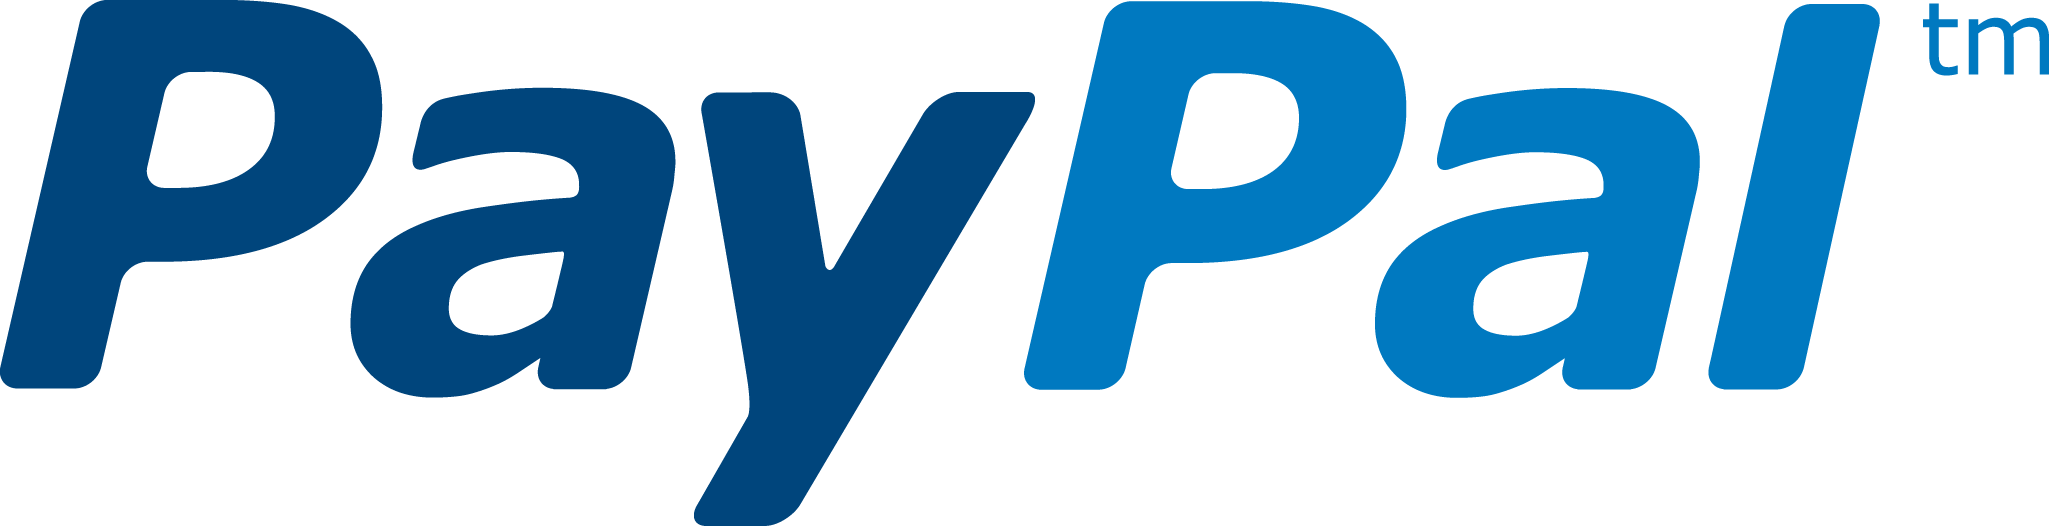 PayPal Me Logo - A new PayPal Payment Option